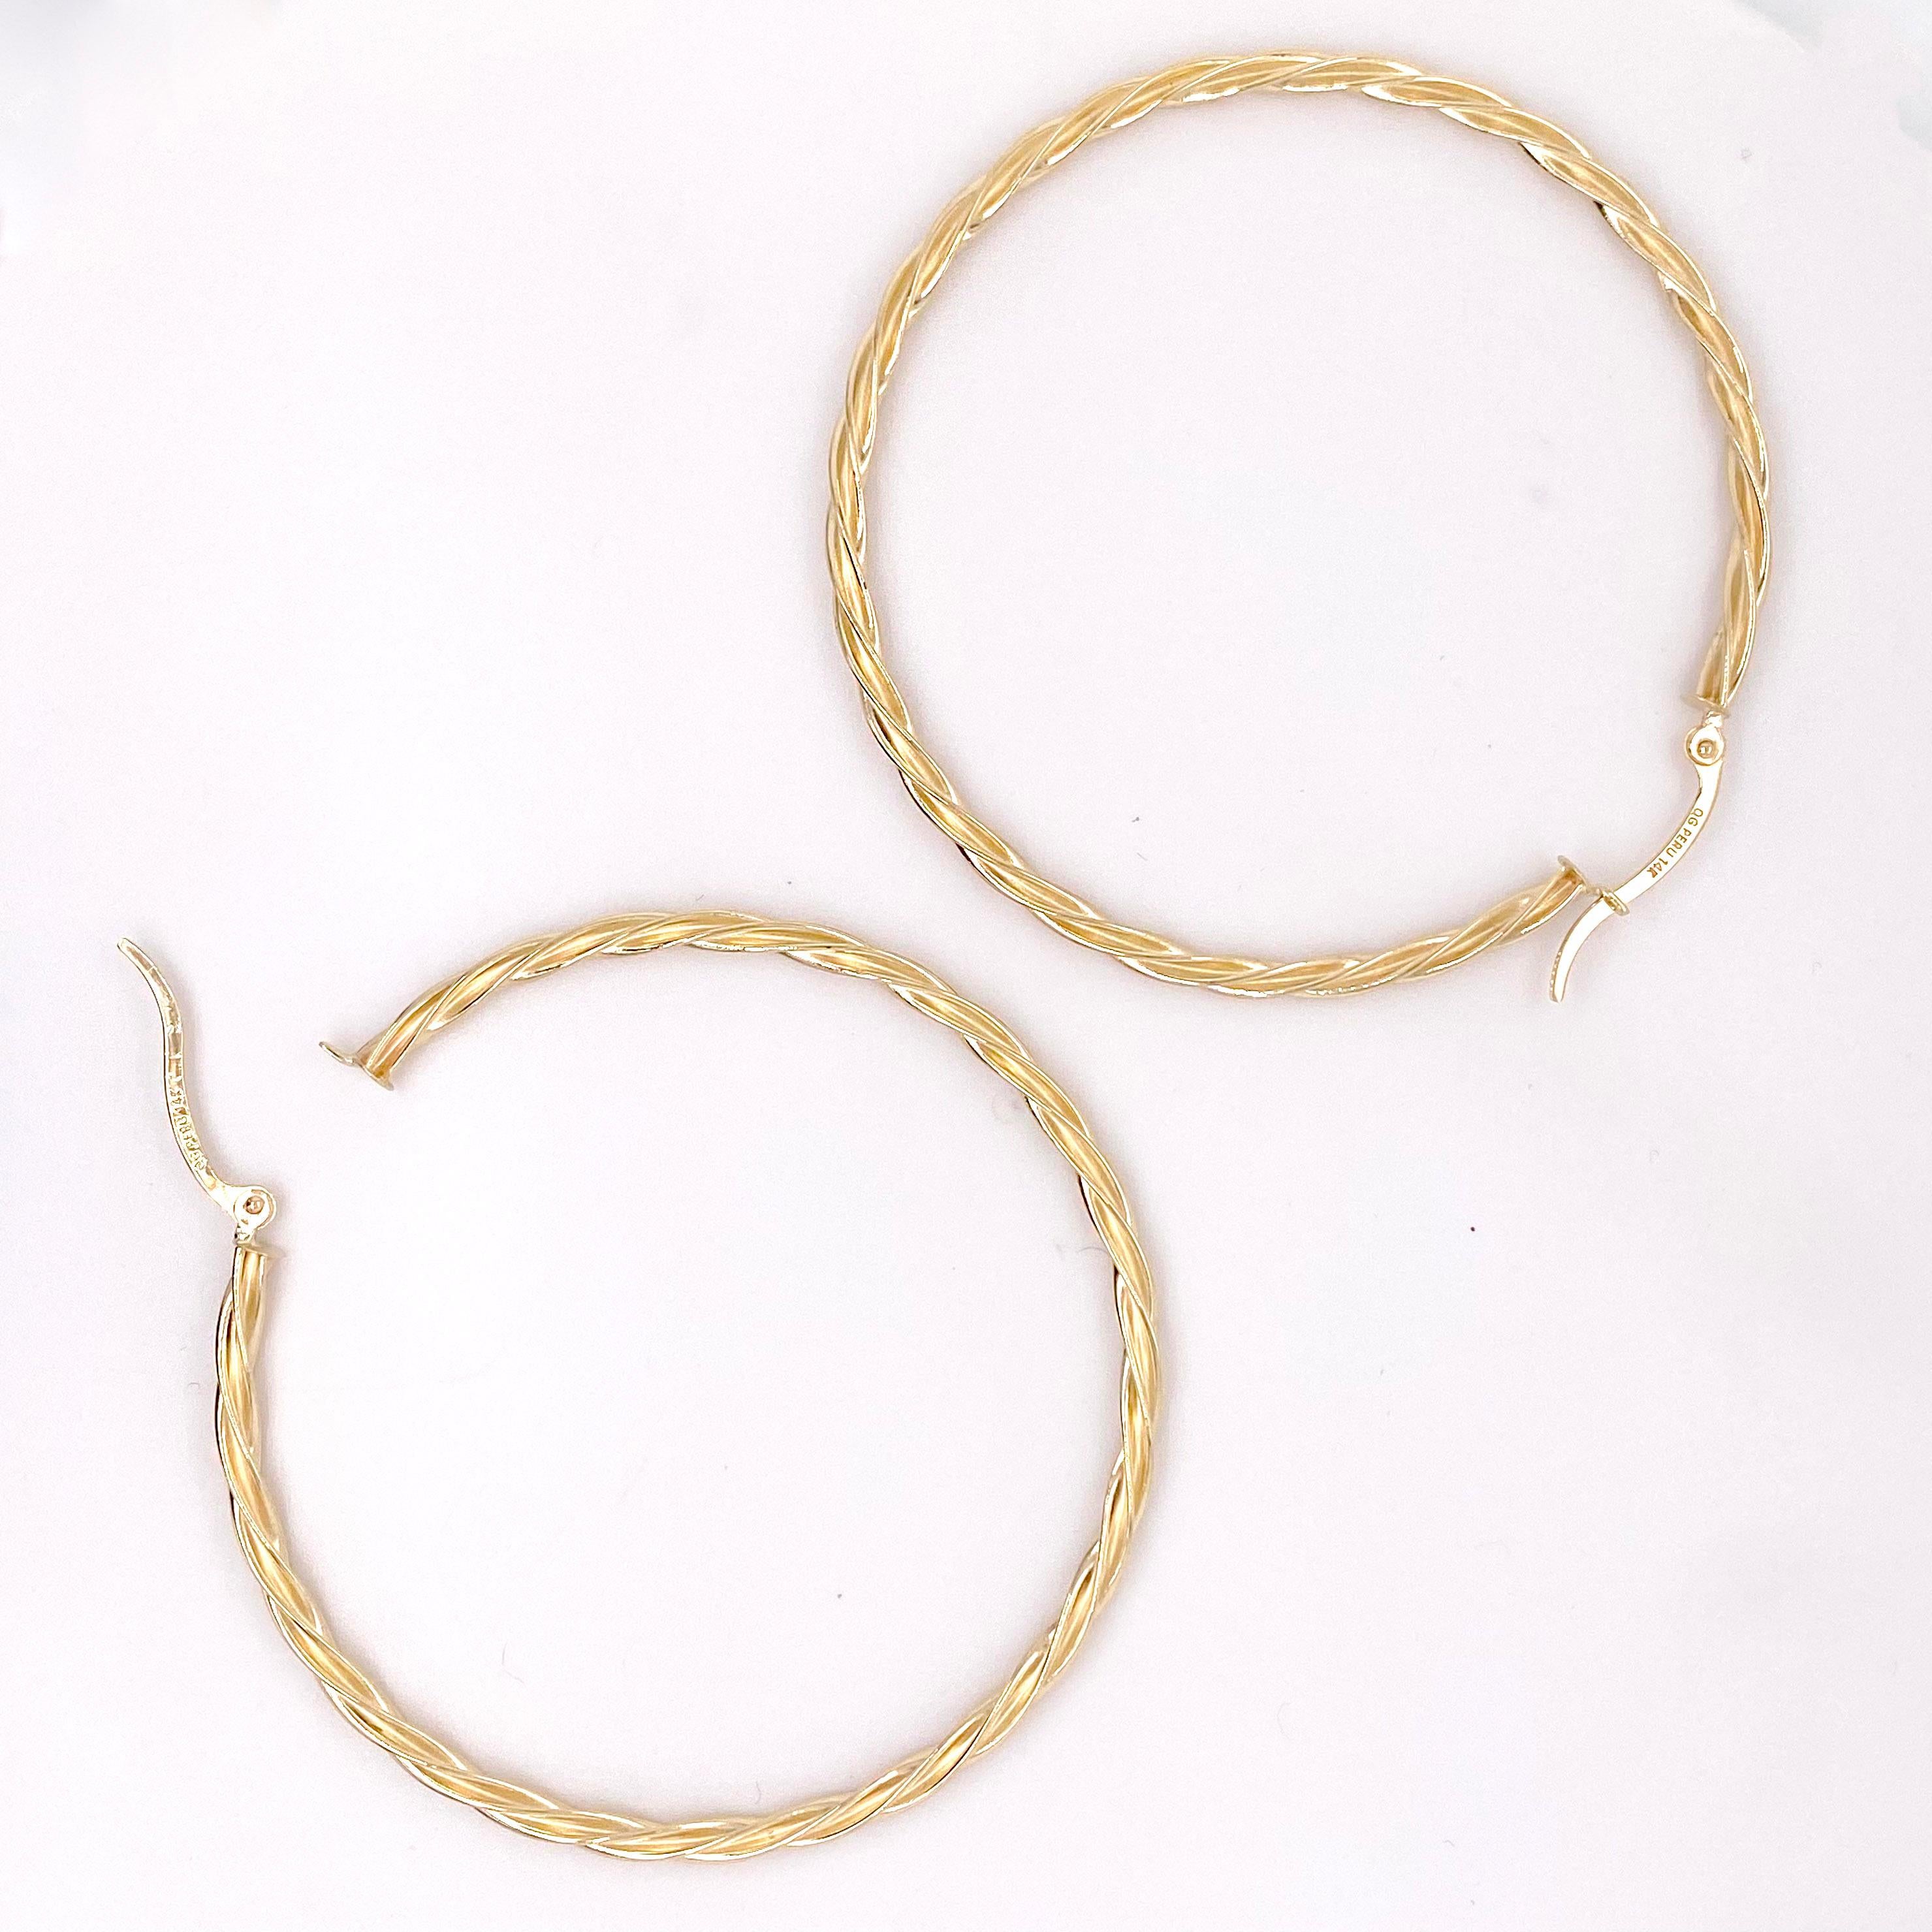 Gold hoop earrings are a staple in fine jewelry! These classic earrings are timeless and upgrade any outfit! The 14 karat yellow gold hoops are lightweight and comfortable to wear with a modern twist texture design. They have a high polish finish